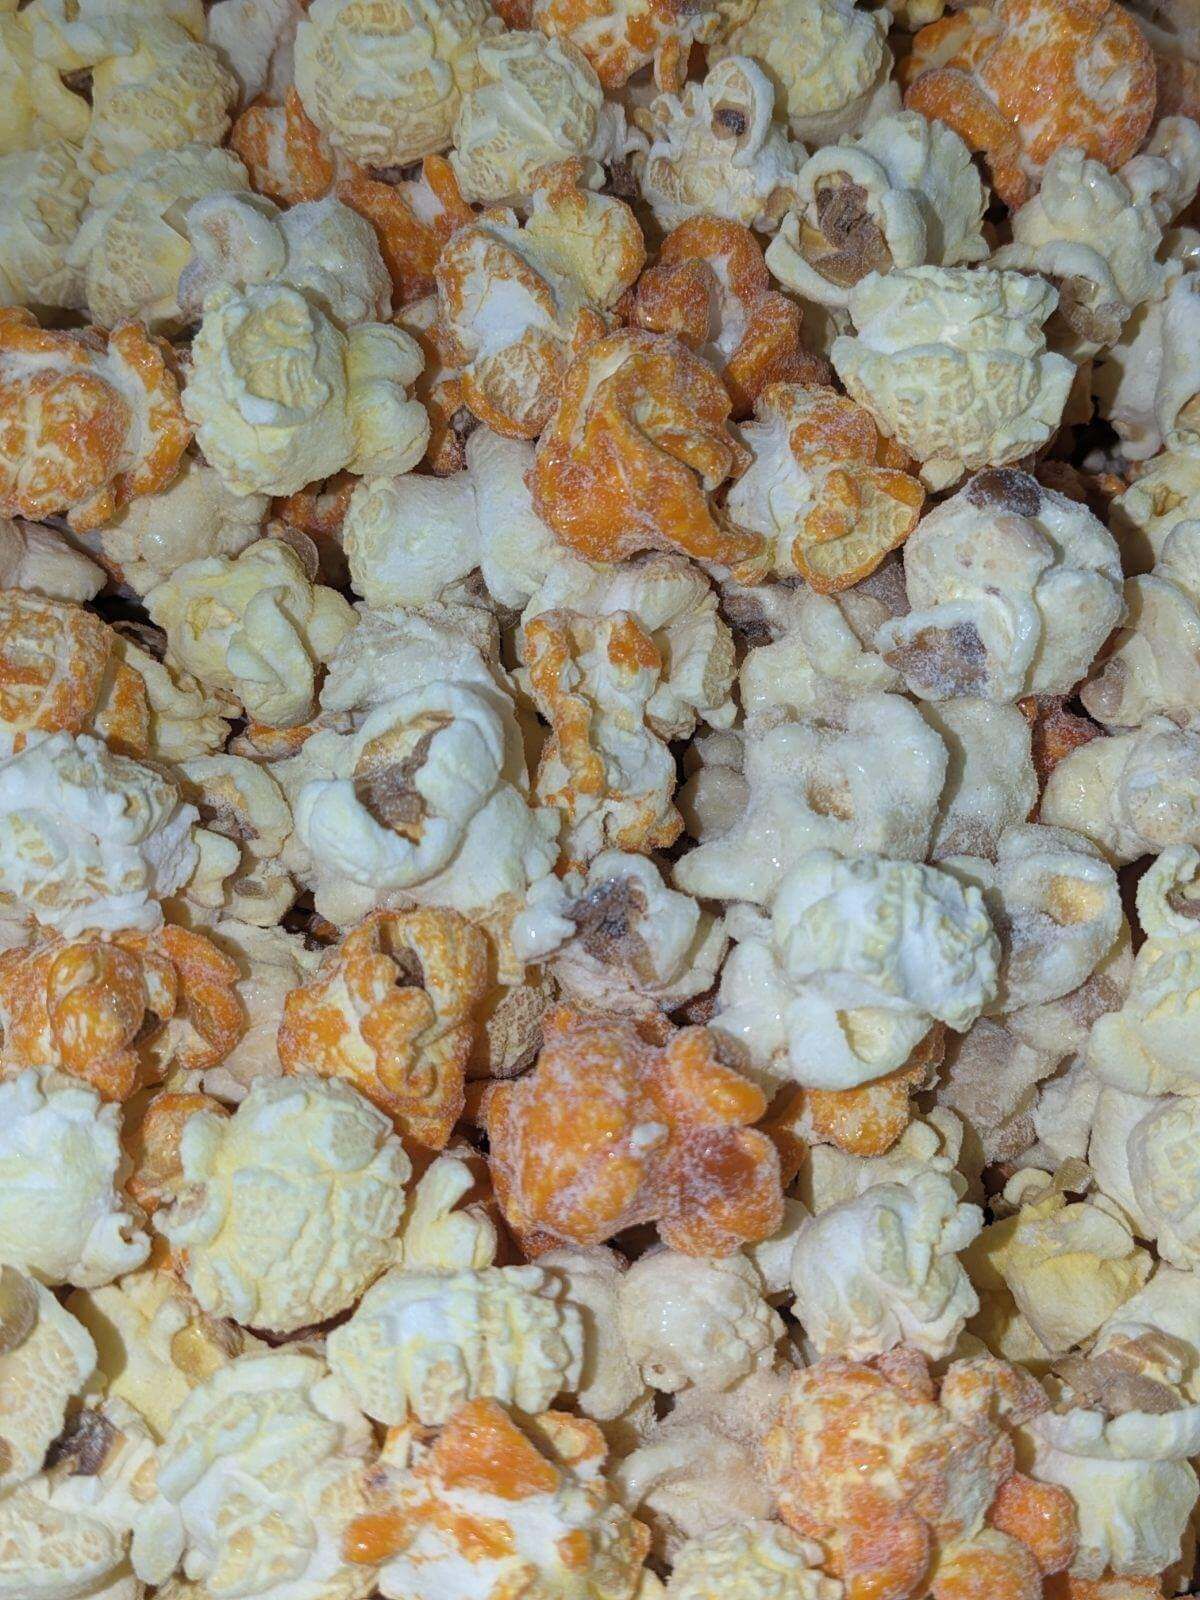 A close up of a pile of popcorn with different flavors.